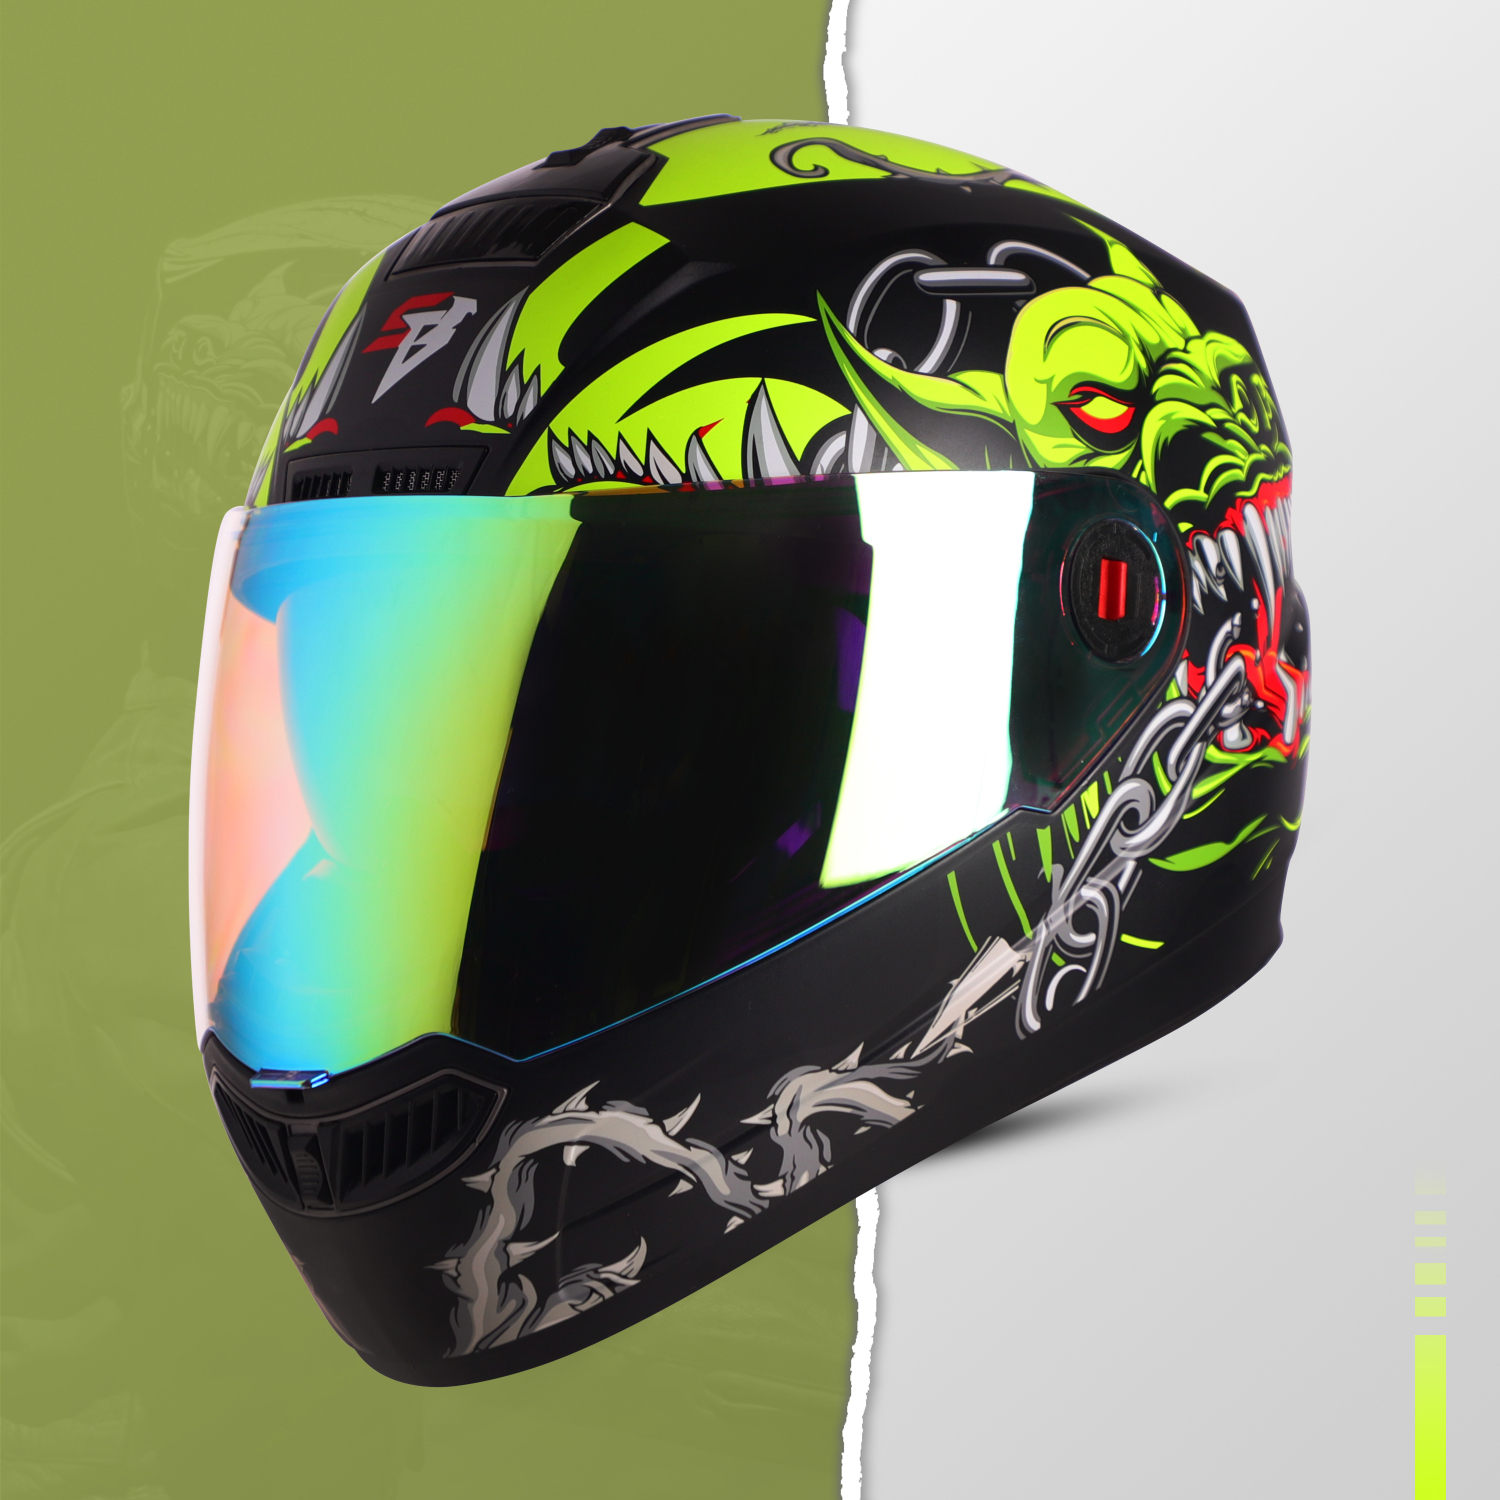 Steelbird SBA-1 Angry Dog ISI Certified Full Face Graphic Helmet For Men And Women With Inner Smoke Sun Shield (Glossy Black Neon With Night Vision Rainbow Visor)